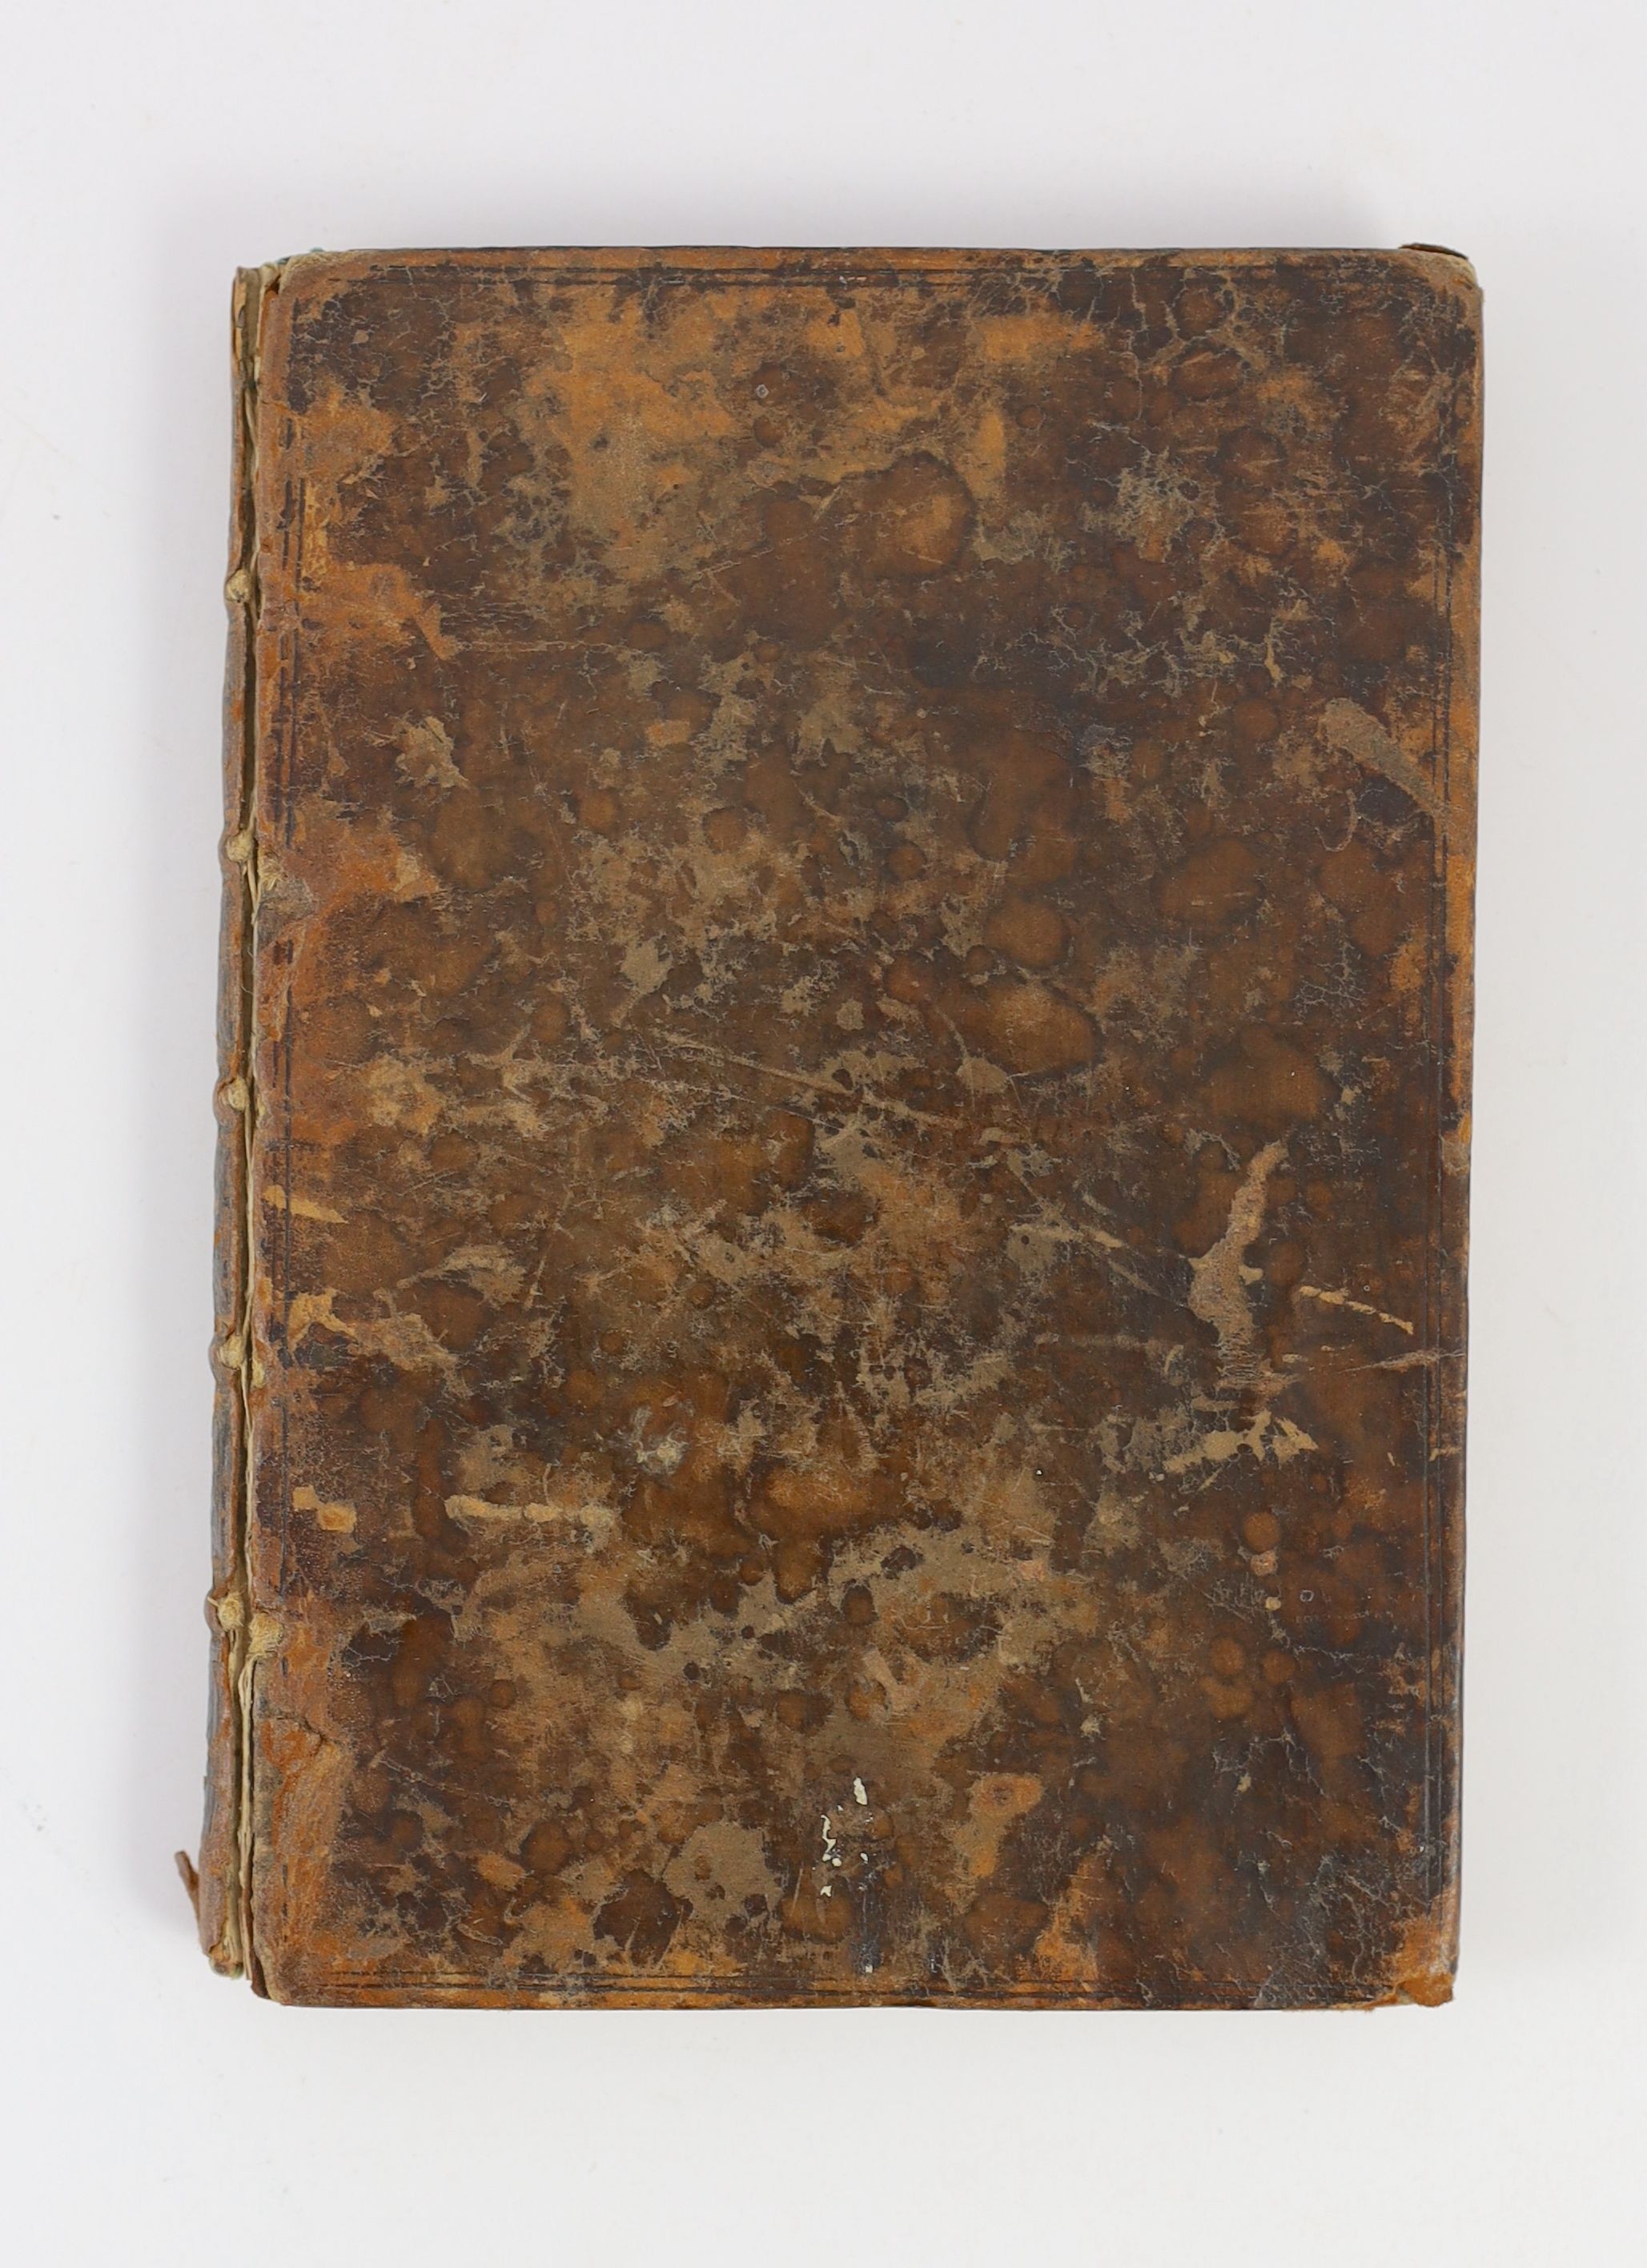 (Clapham, Henoch-The Historie of England. The first booke) -lacks title and prelims., engraved headpiece decorations and initial letter; 102, (4)pp.; old calf, 8vo. Valentine Simmes, for John Barnes, 1602